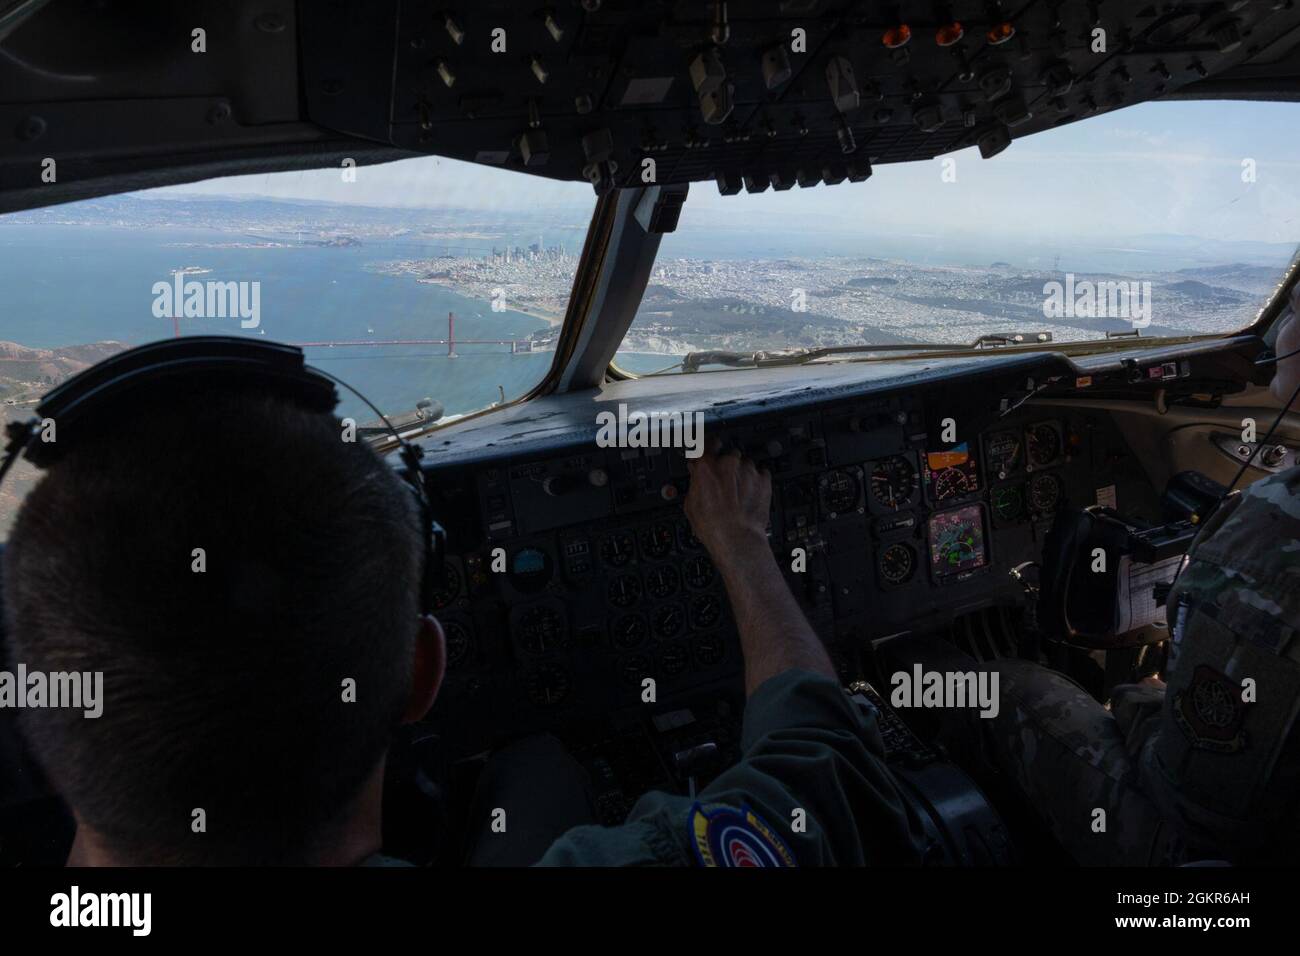 U.S. Air Force Col. Zachery Jiron, 60th Air Mobility Wing vice commander, left, and Capt. Karen Miller, 6th Air Refueling Squadron KC-10 Extender pilot, fly over San Francisco during Jiron’s fini flight June 17, 2021. Final flight, also known as fini flight, is a tradition for pilots and some aircrew members who are retiring or moving to another base. Part of the tradition is getting hosed with water as soon as they step out of the aircraft after the flight. Stock Photo